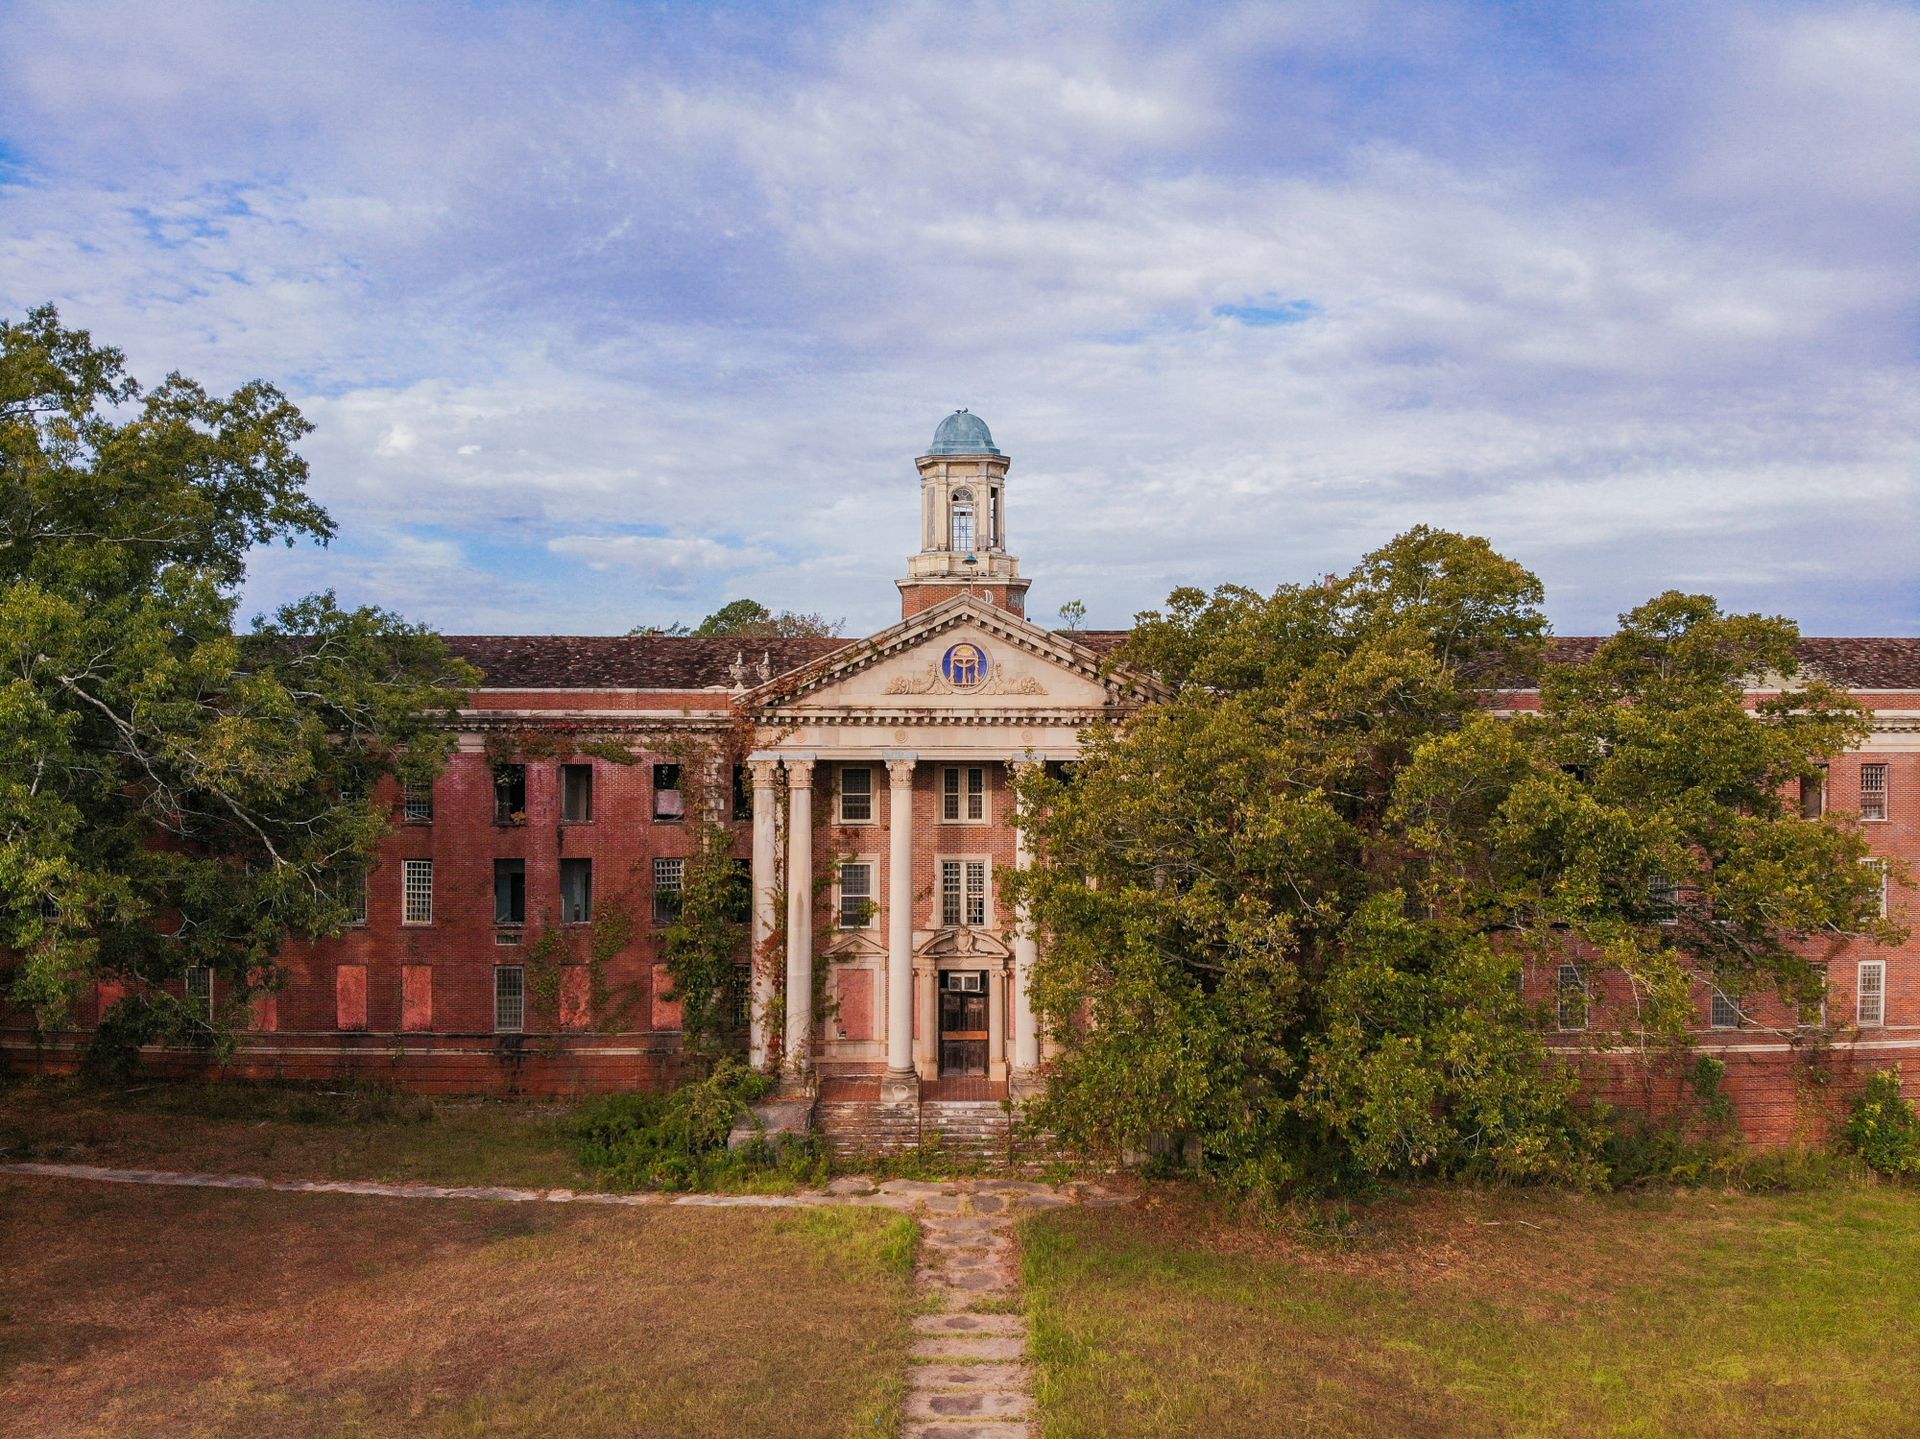 World's Largest Abandoned Mental Asylum: world record in Milledgeville, Georgia